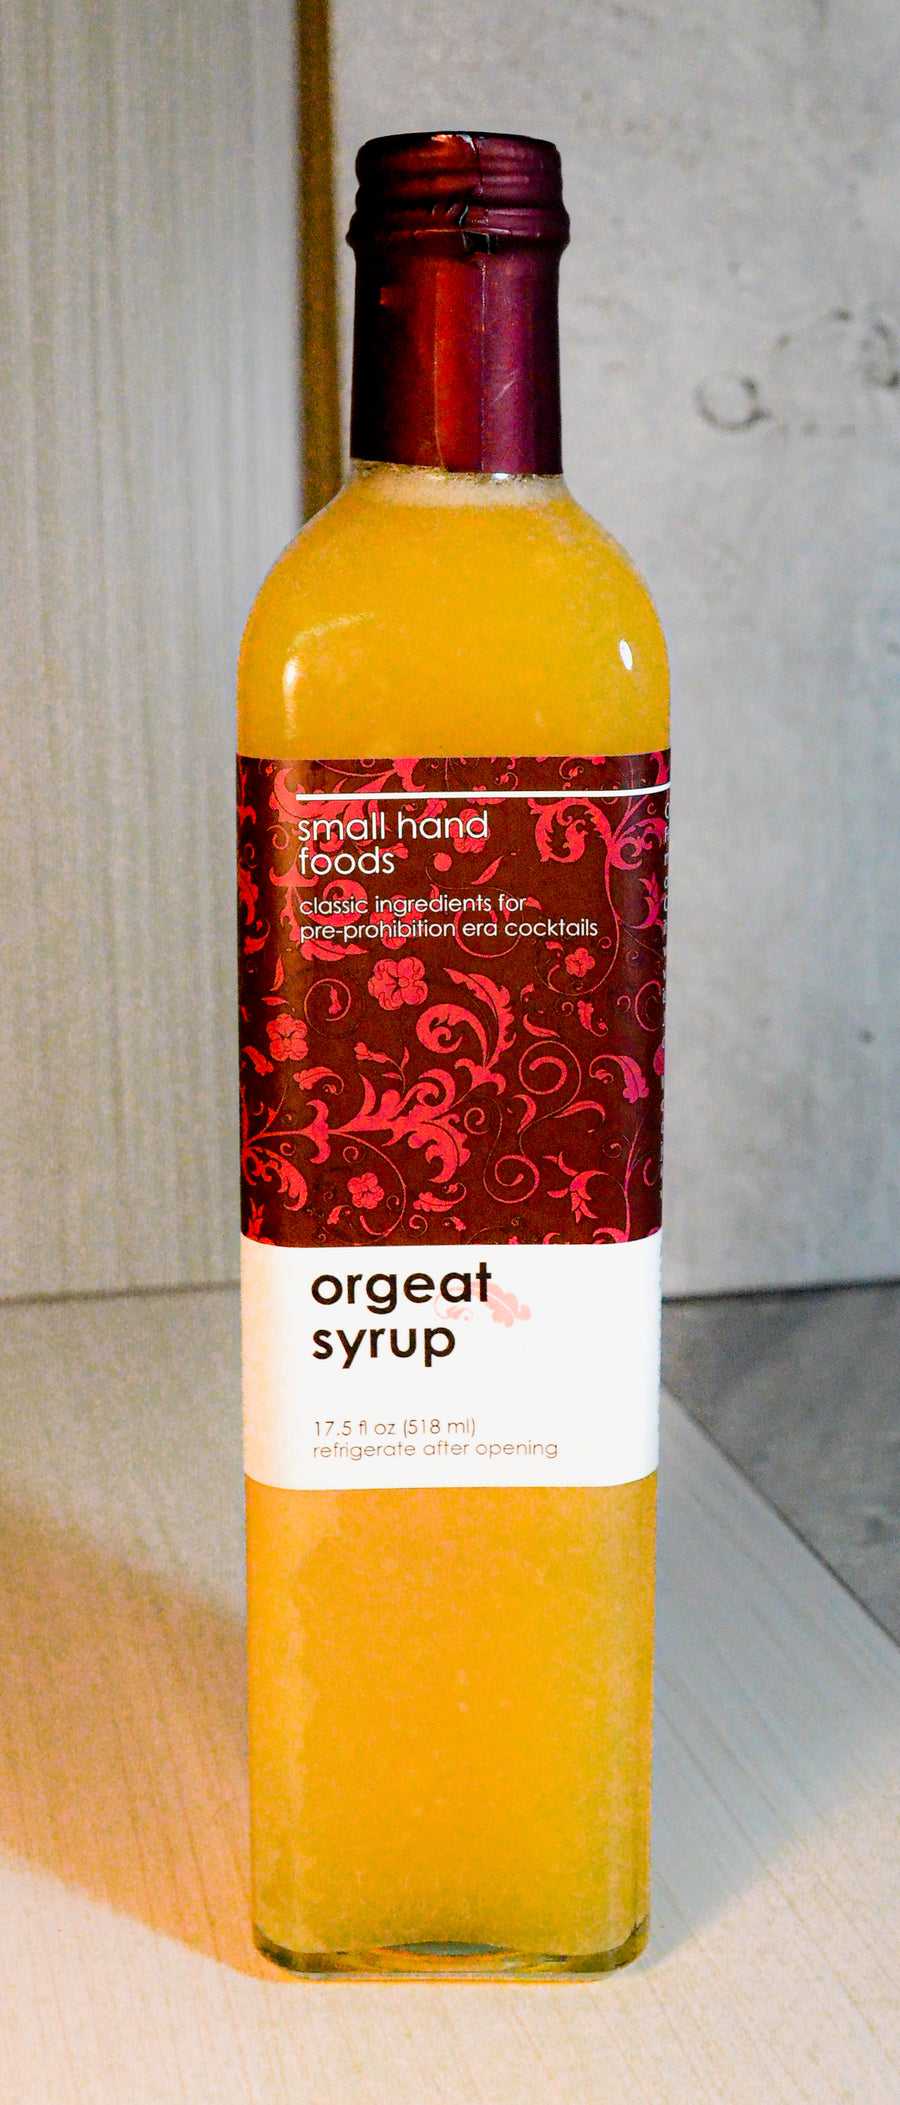 Small Hand Foods, Orgeat Syrup 17.5oz